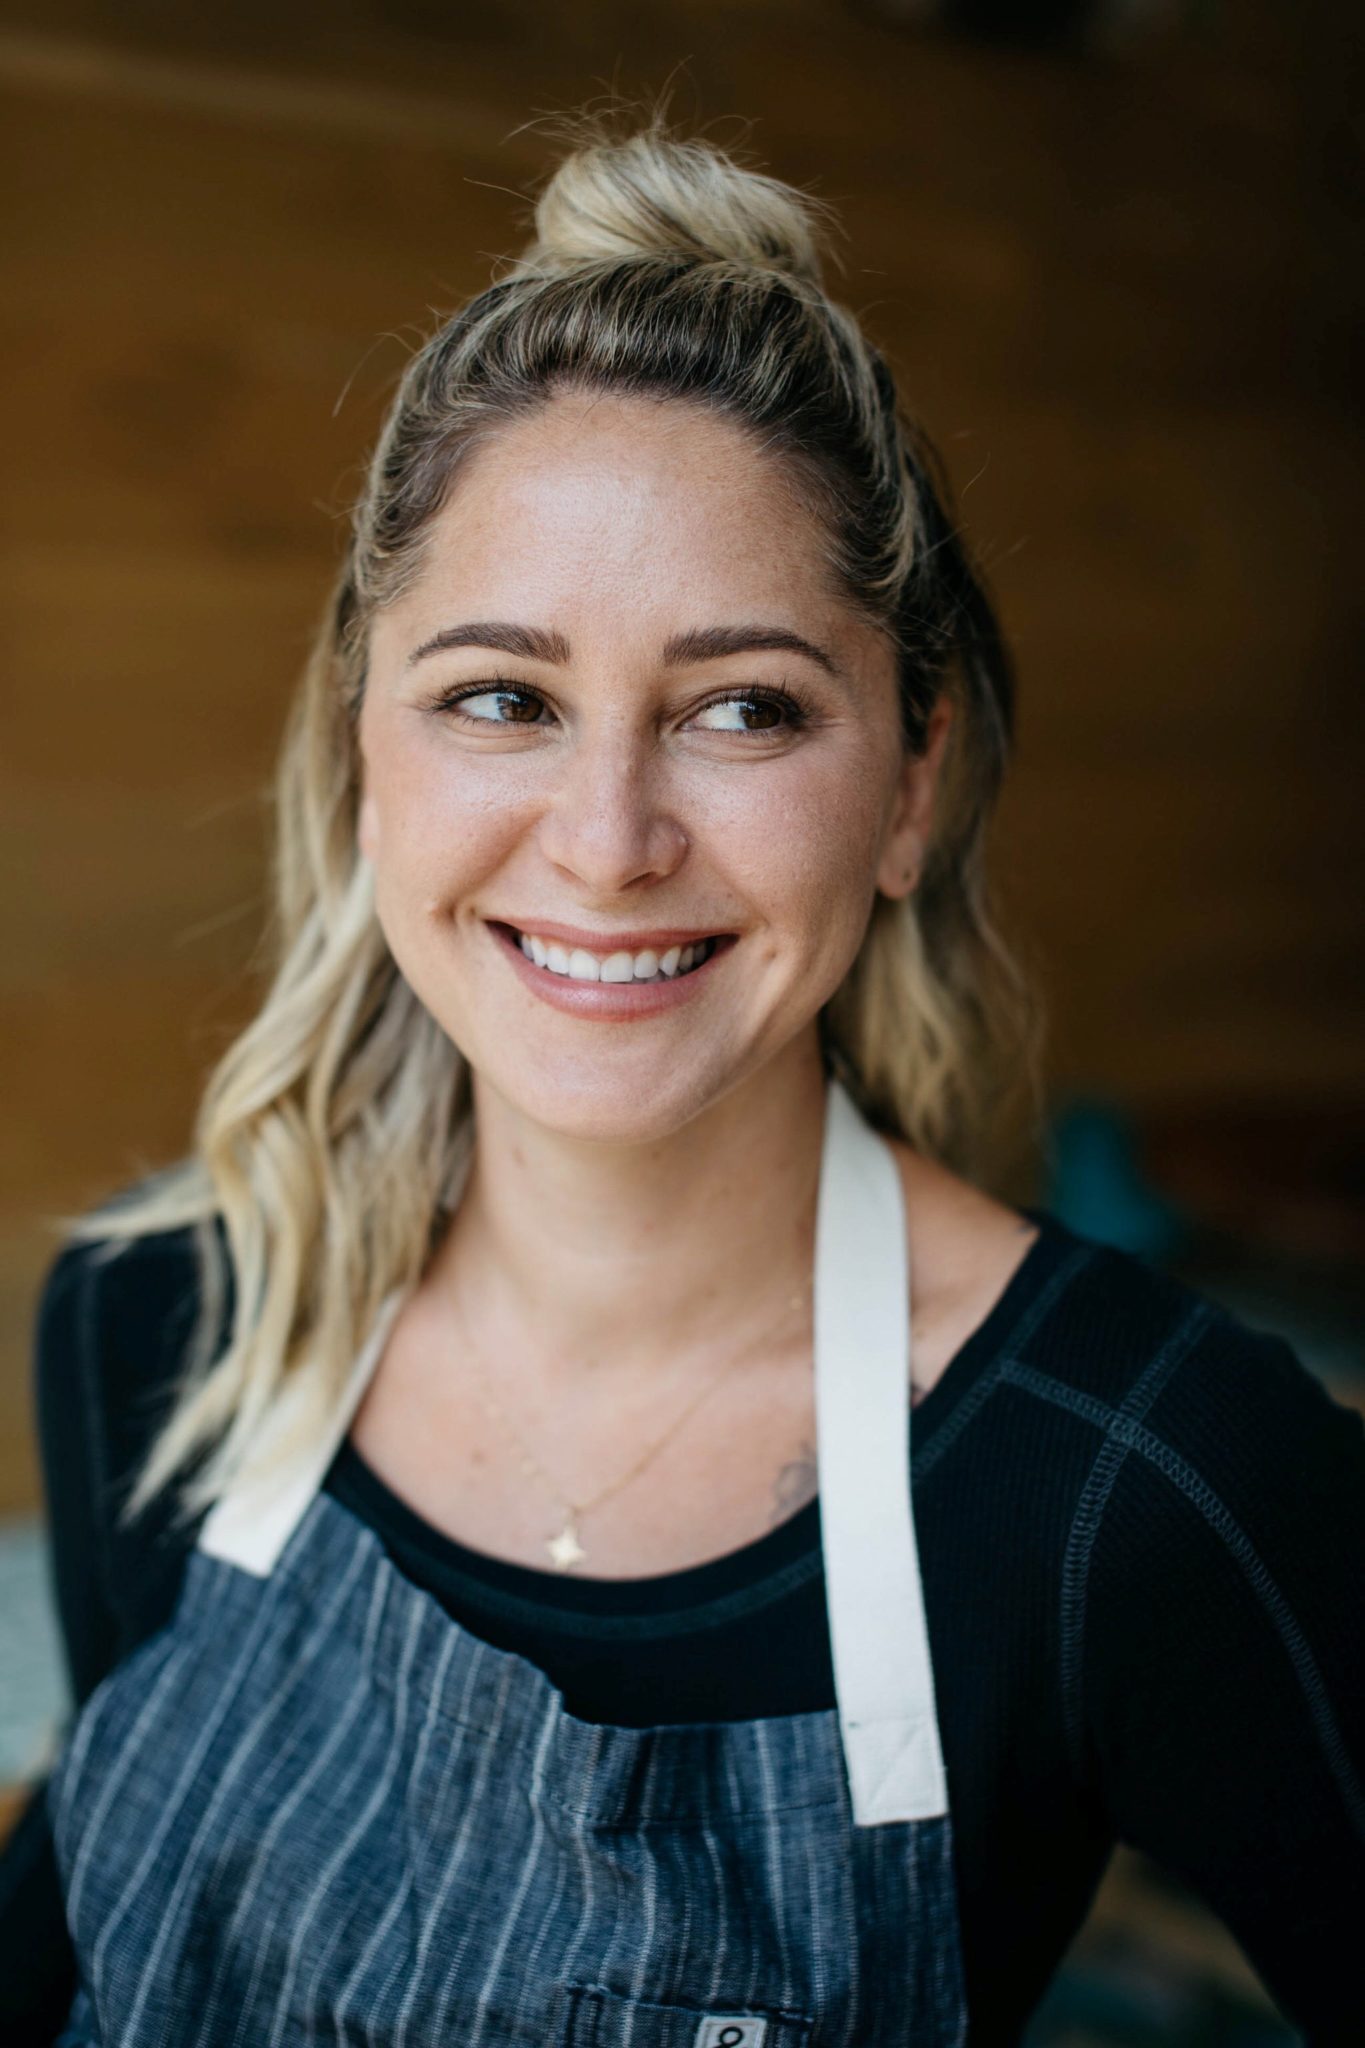 Gifts For The Home Chef - Ashley Brooke